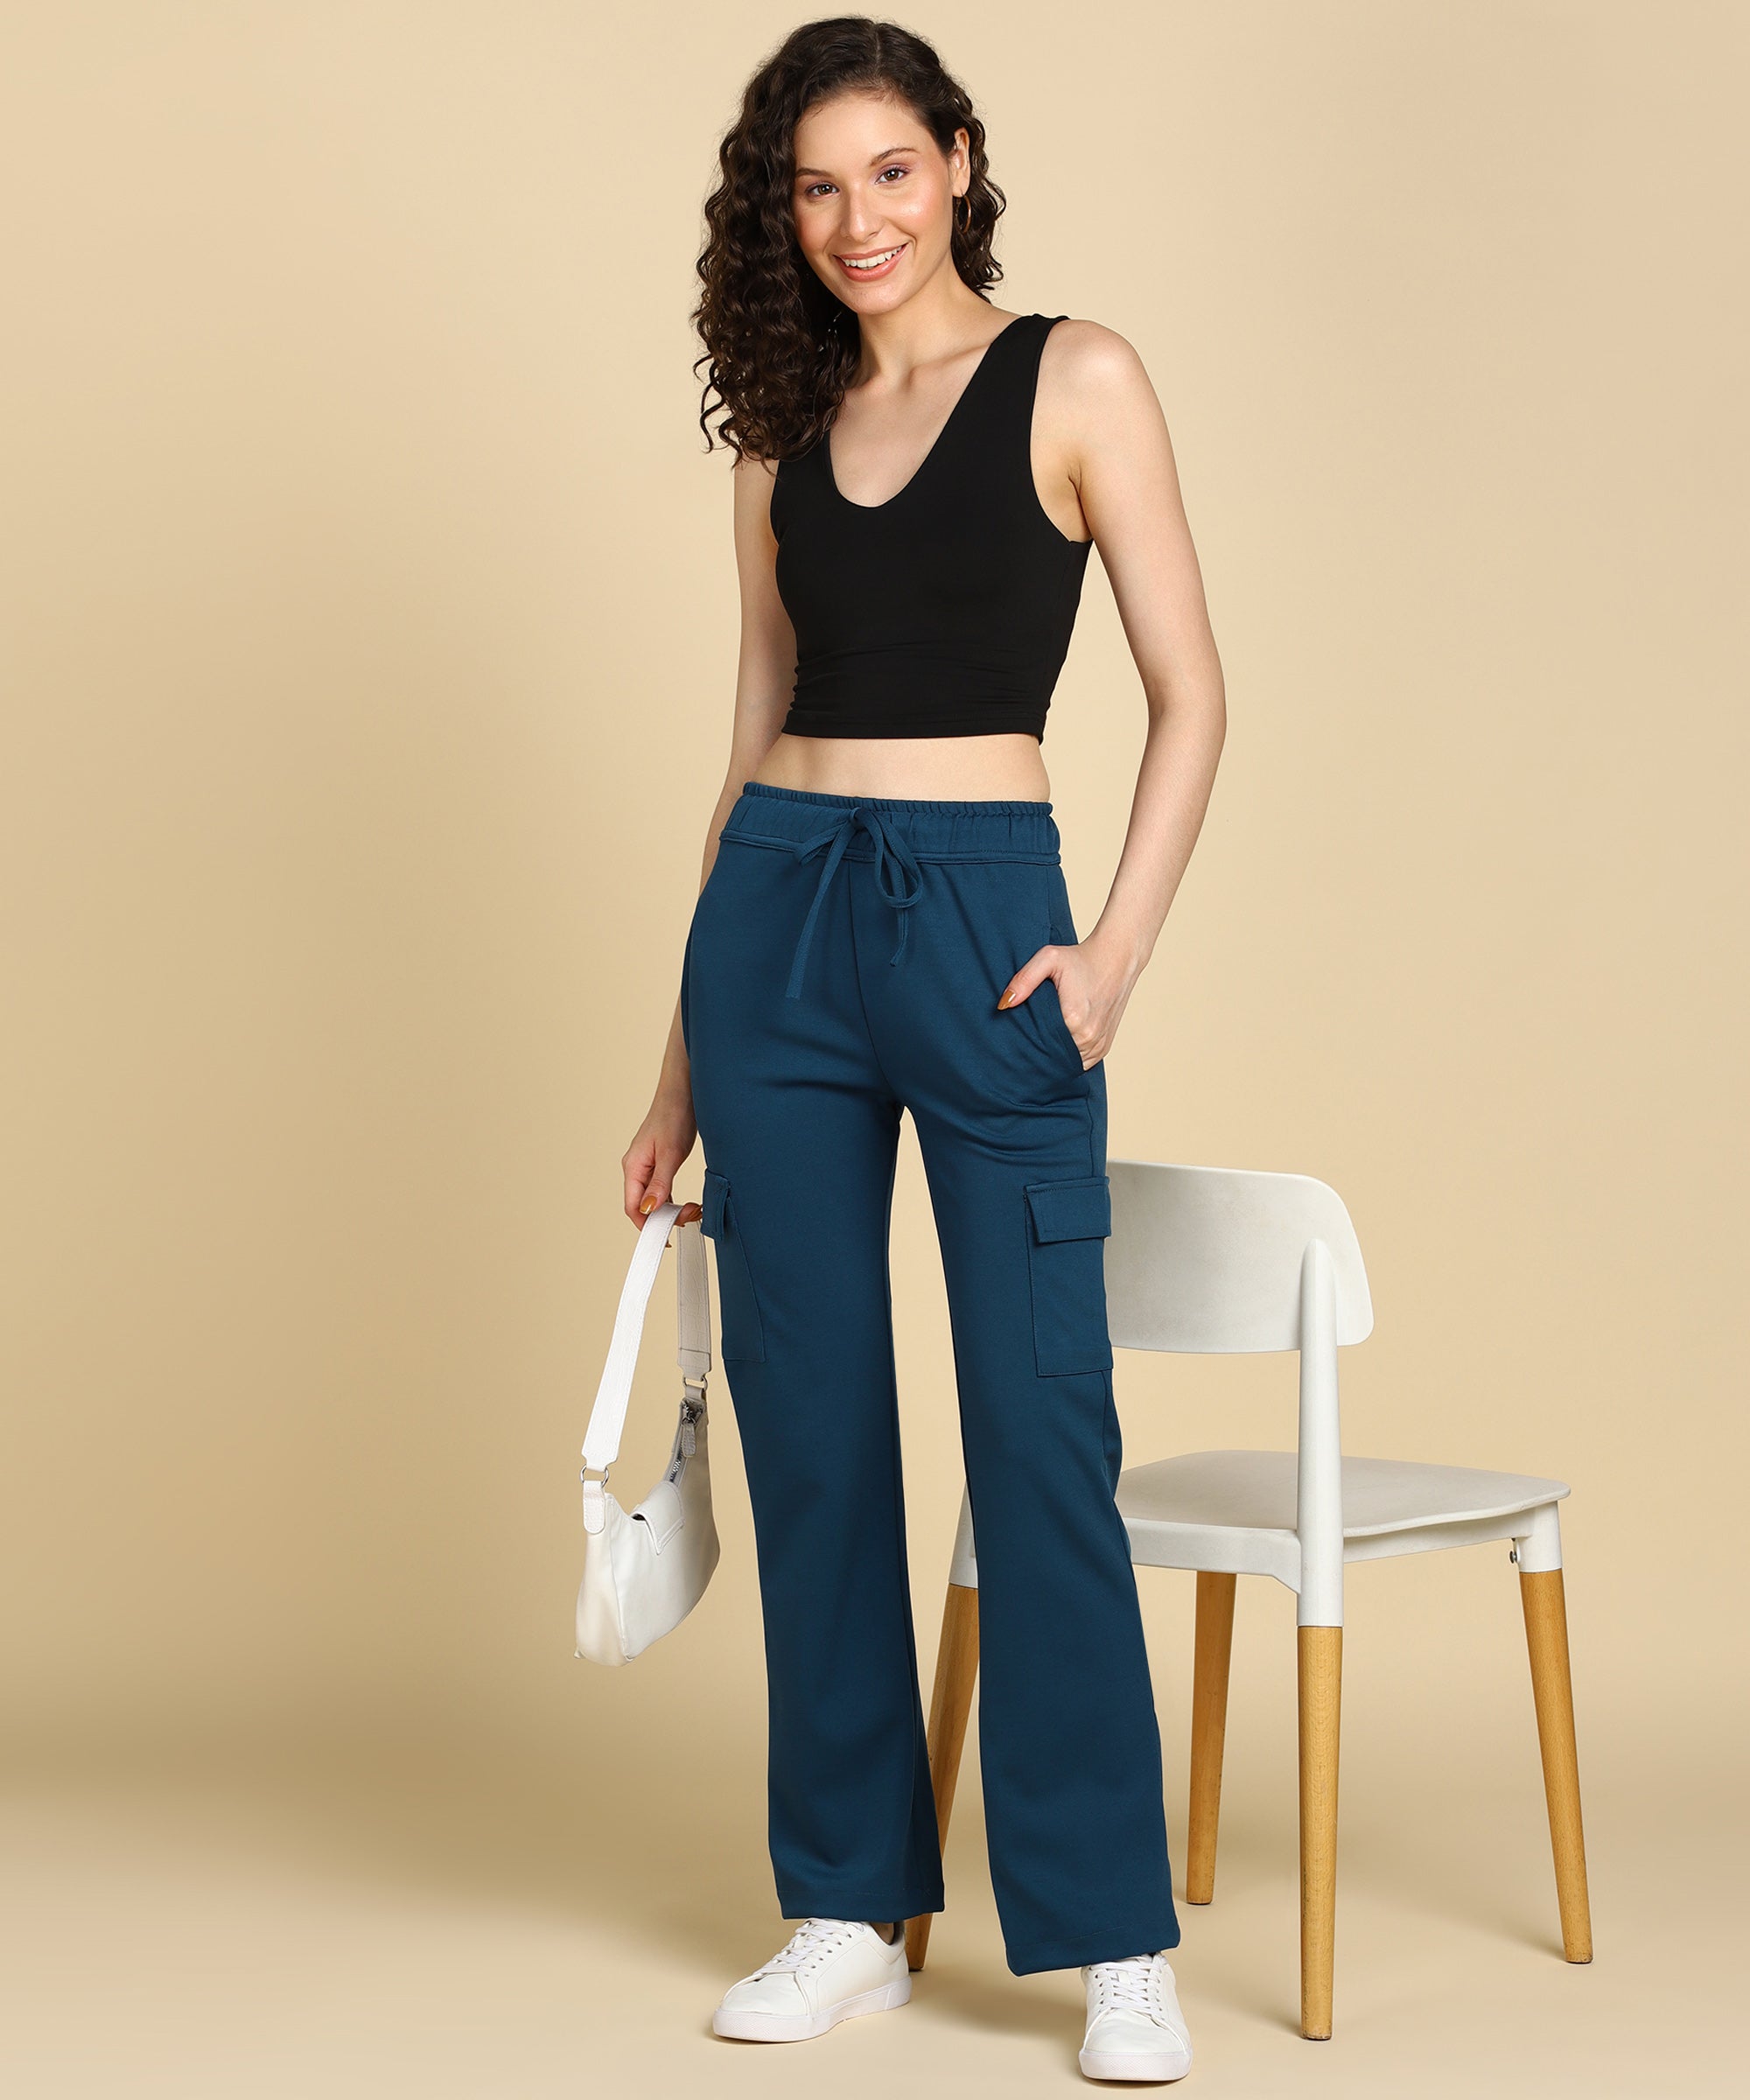 Petite VS. Regular Pants Sizing Guide For Women: Differences You Should  Know - Beth Ferguson | Serious About Styling (SAS for Short)